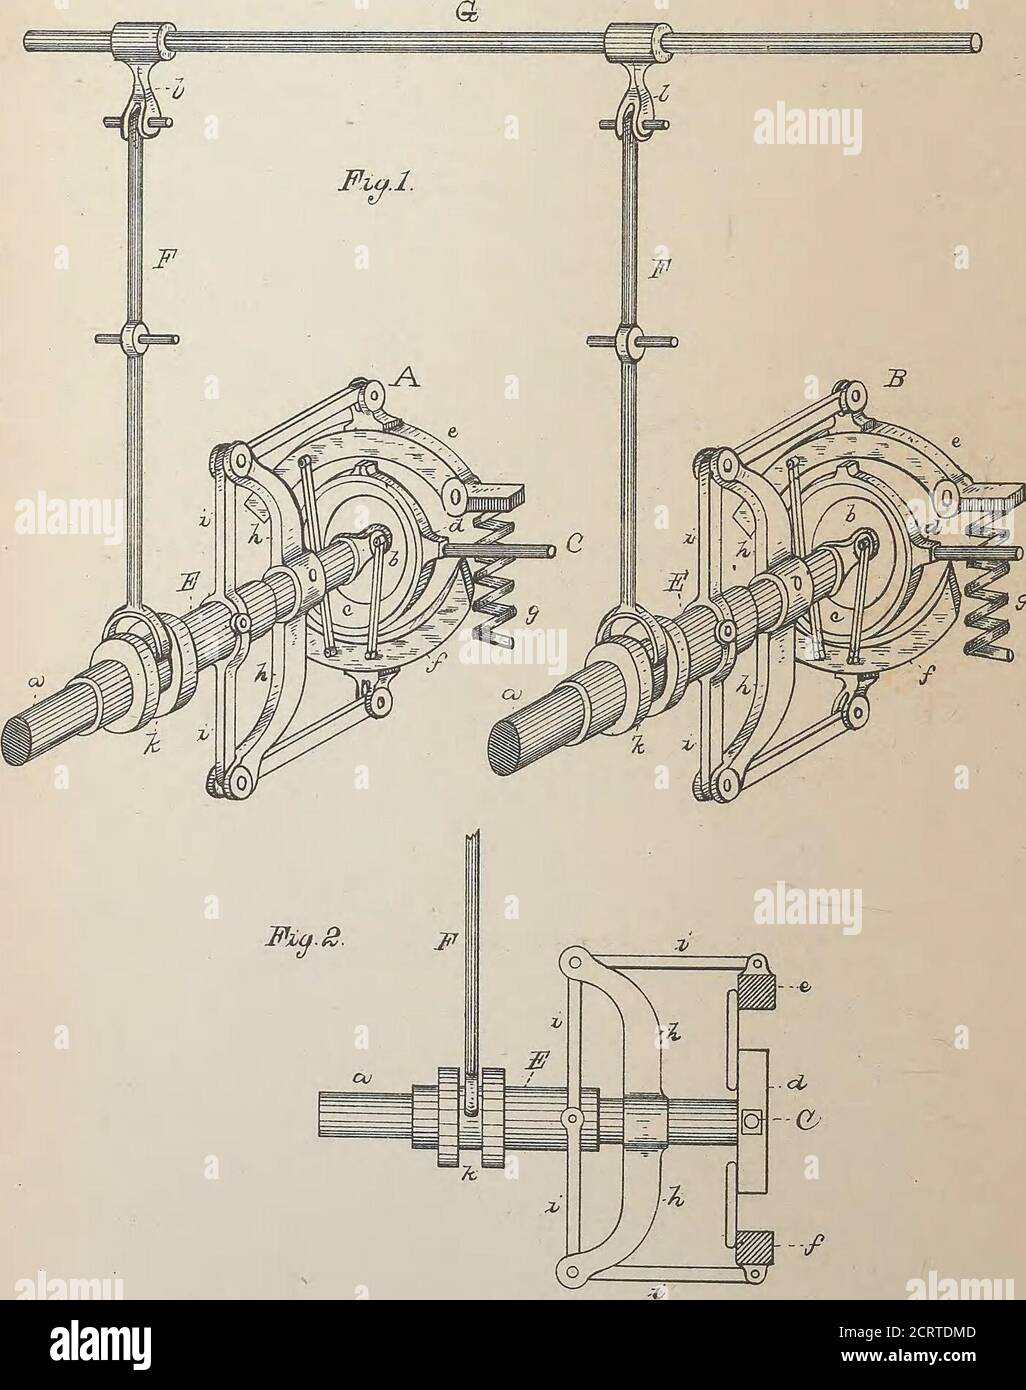 . Collection of United States patents granted to Thomas A. Edison, 1869-1884 . directions, as shown bythe arrows, and strained to the limits of theirtorsional elasticity, when they are fastened to- 35gether by pins a, or by other suitable means.The shaft may be constructed of iron, steel, orother suitable material. I have found thischaracter of shafting exceedingly efficient foruse in connecting the governors of several en- 40gines together, so as to force the engines toact in unison; but 1 do not wish to limit my-self to any particular use, since it is applica-ble to all uses where nou-torsio Stock Photo